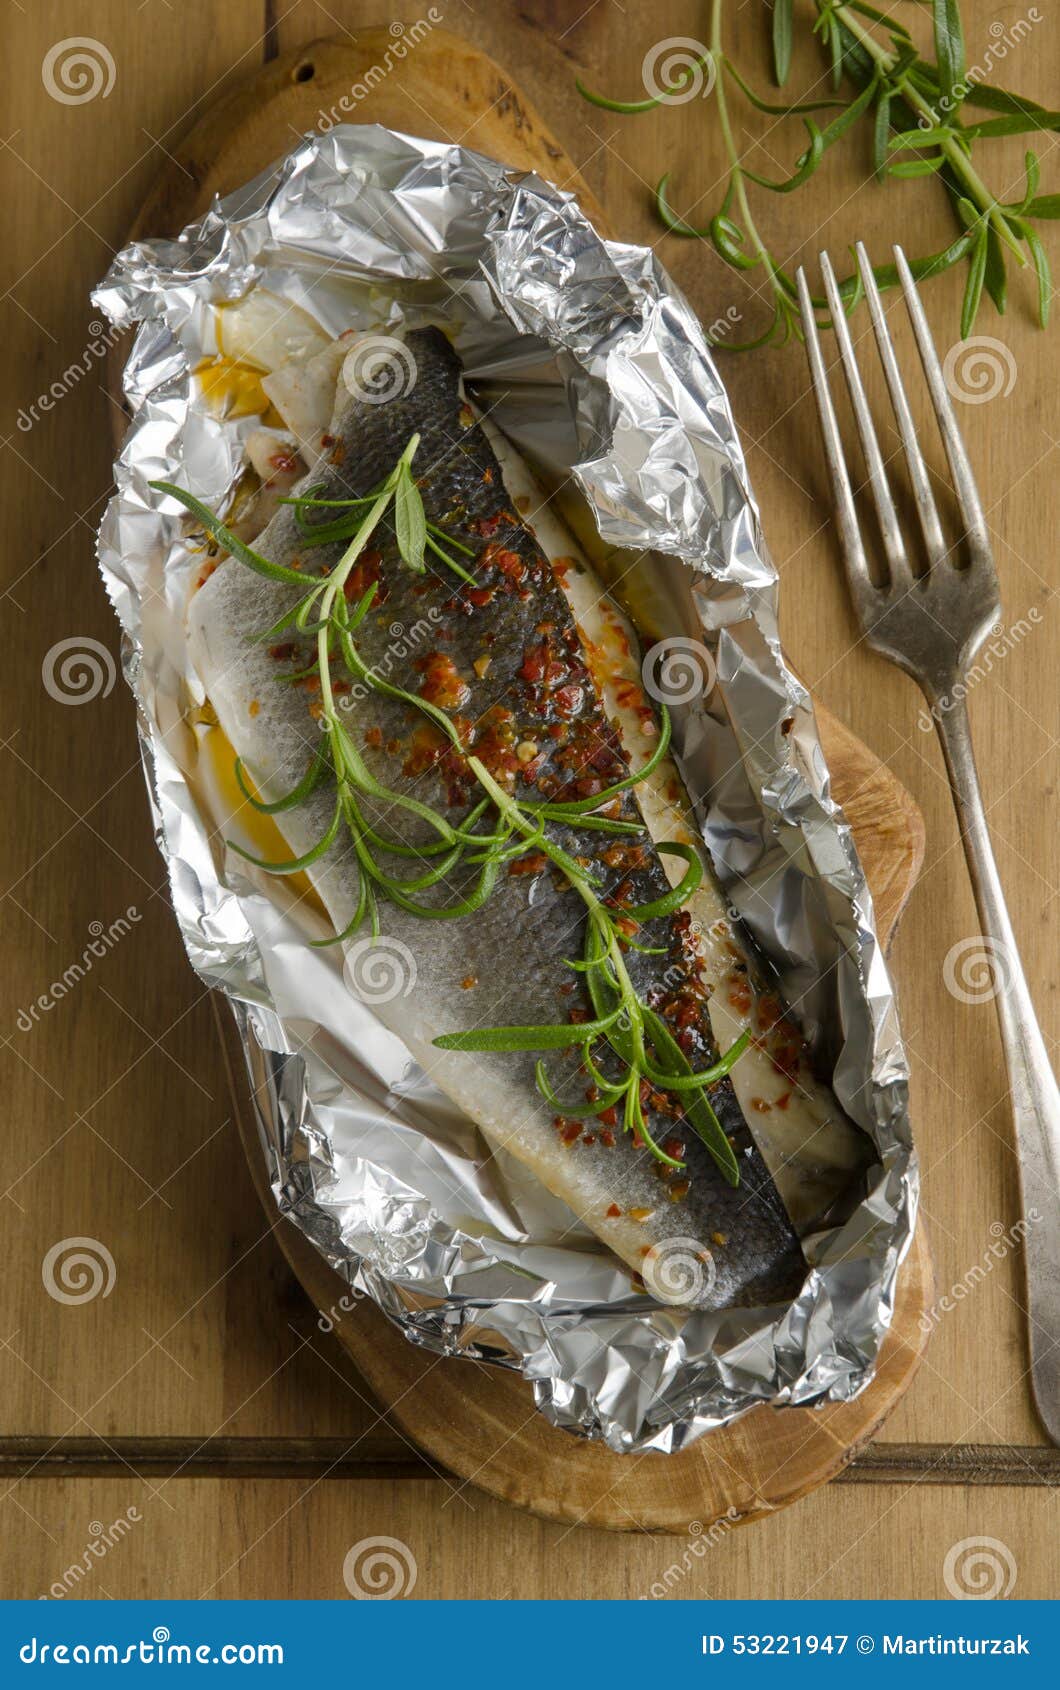 Baked sea bass stock image. Image of dinner, rosemary - 53221947